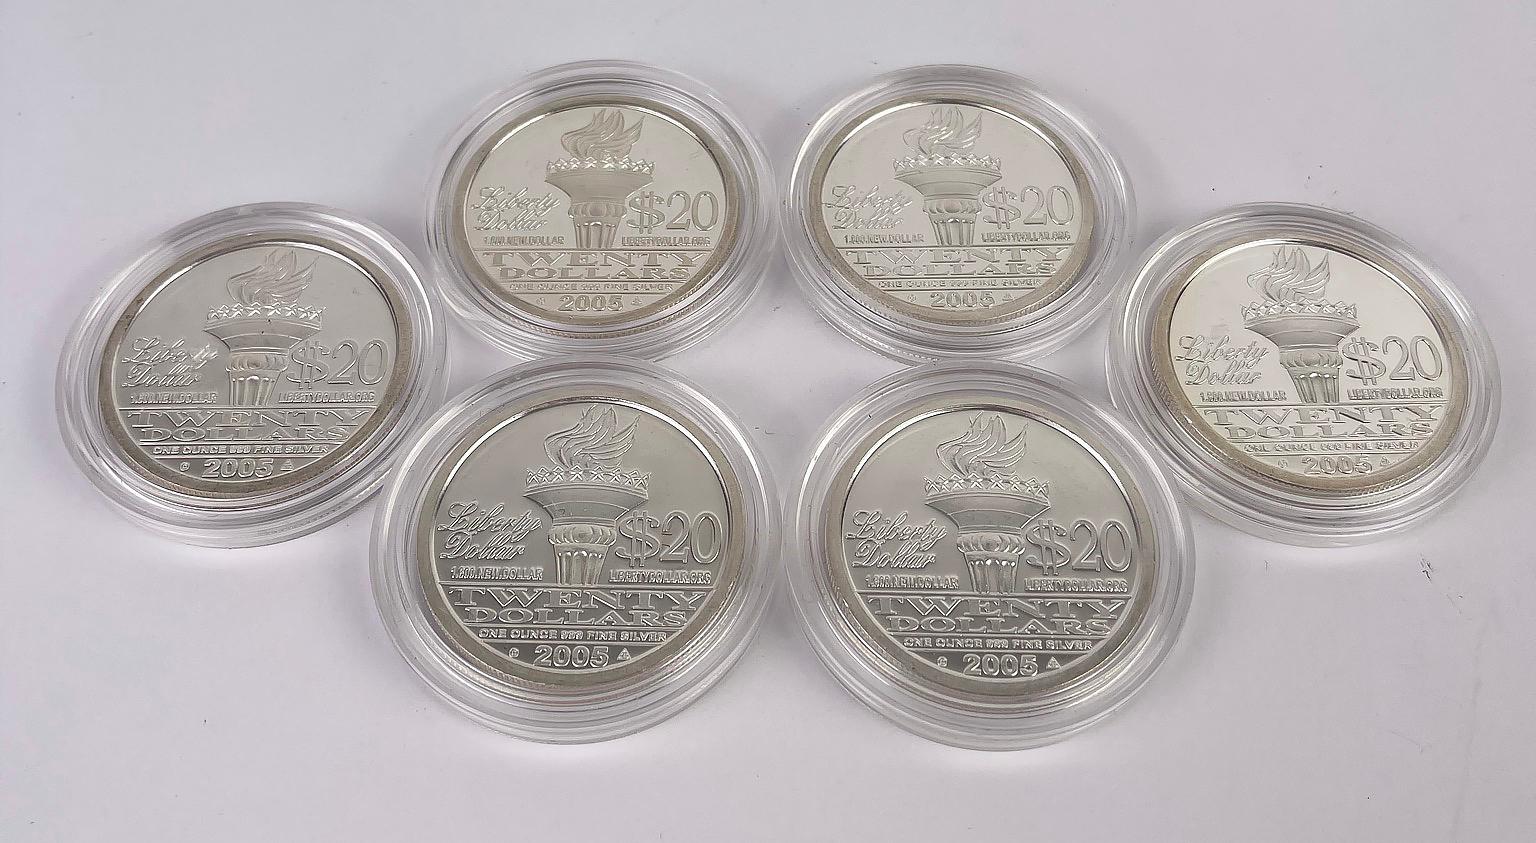 Norfed 1oz Silver Rounds $20 Liberty Dollars